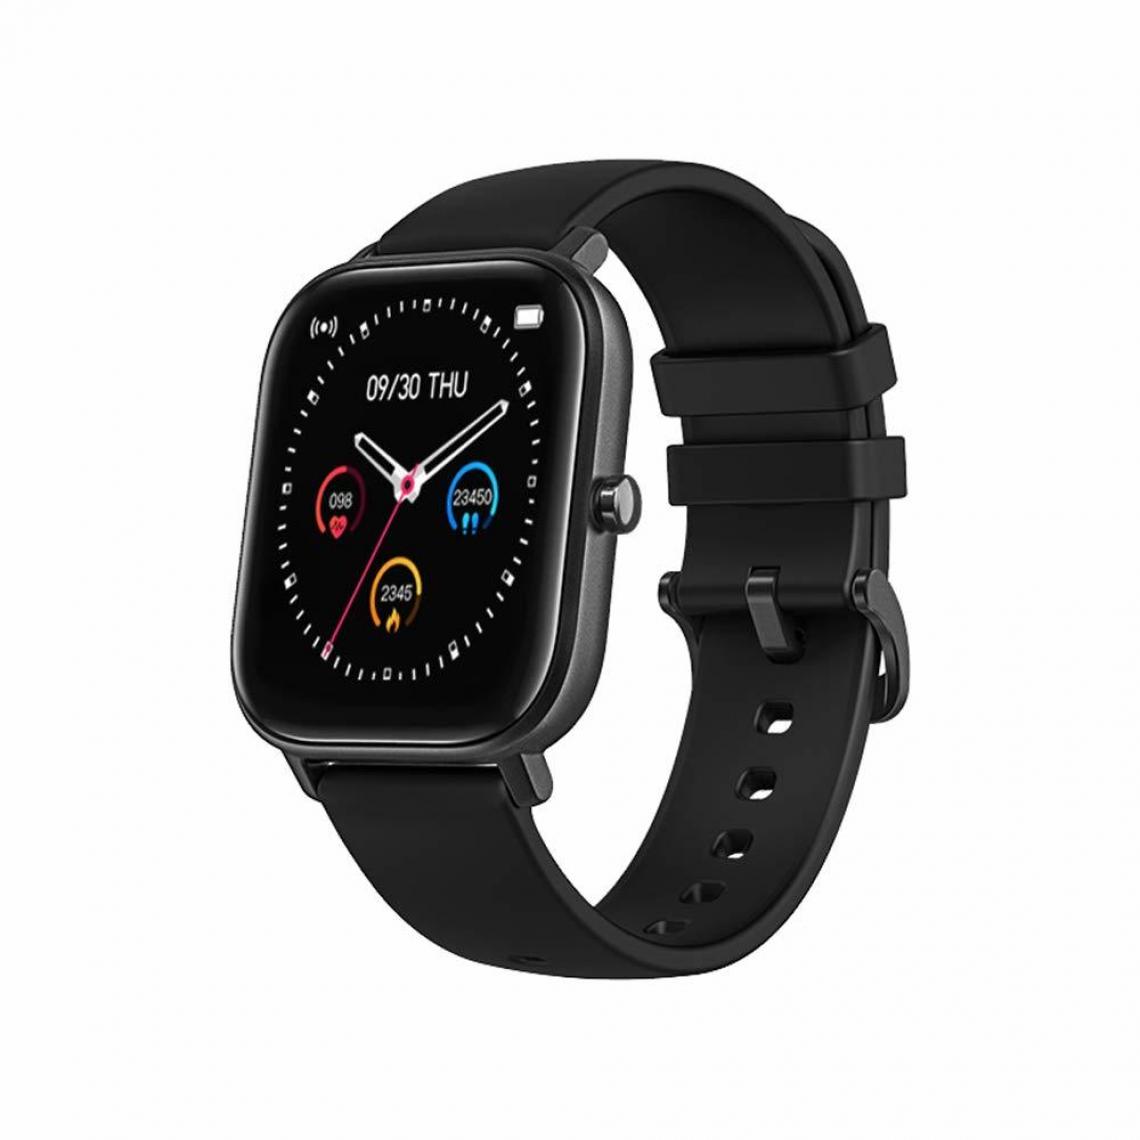 Chronotech Montres - Chronus Smart Watch, With Heart Rate/Blood Pressure/Blood Oxygen Monitoring Function, 1.4 Inch Screen Health Tracker, Sleep Monitoring(black) - Montre connectée